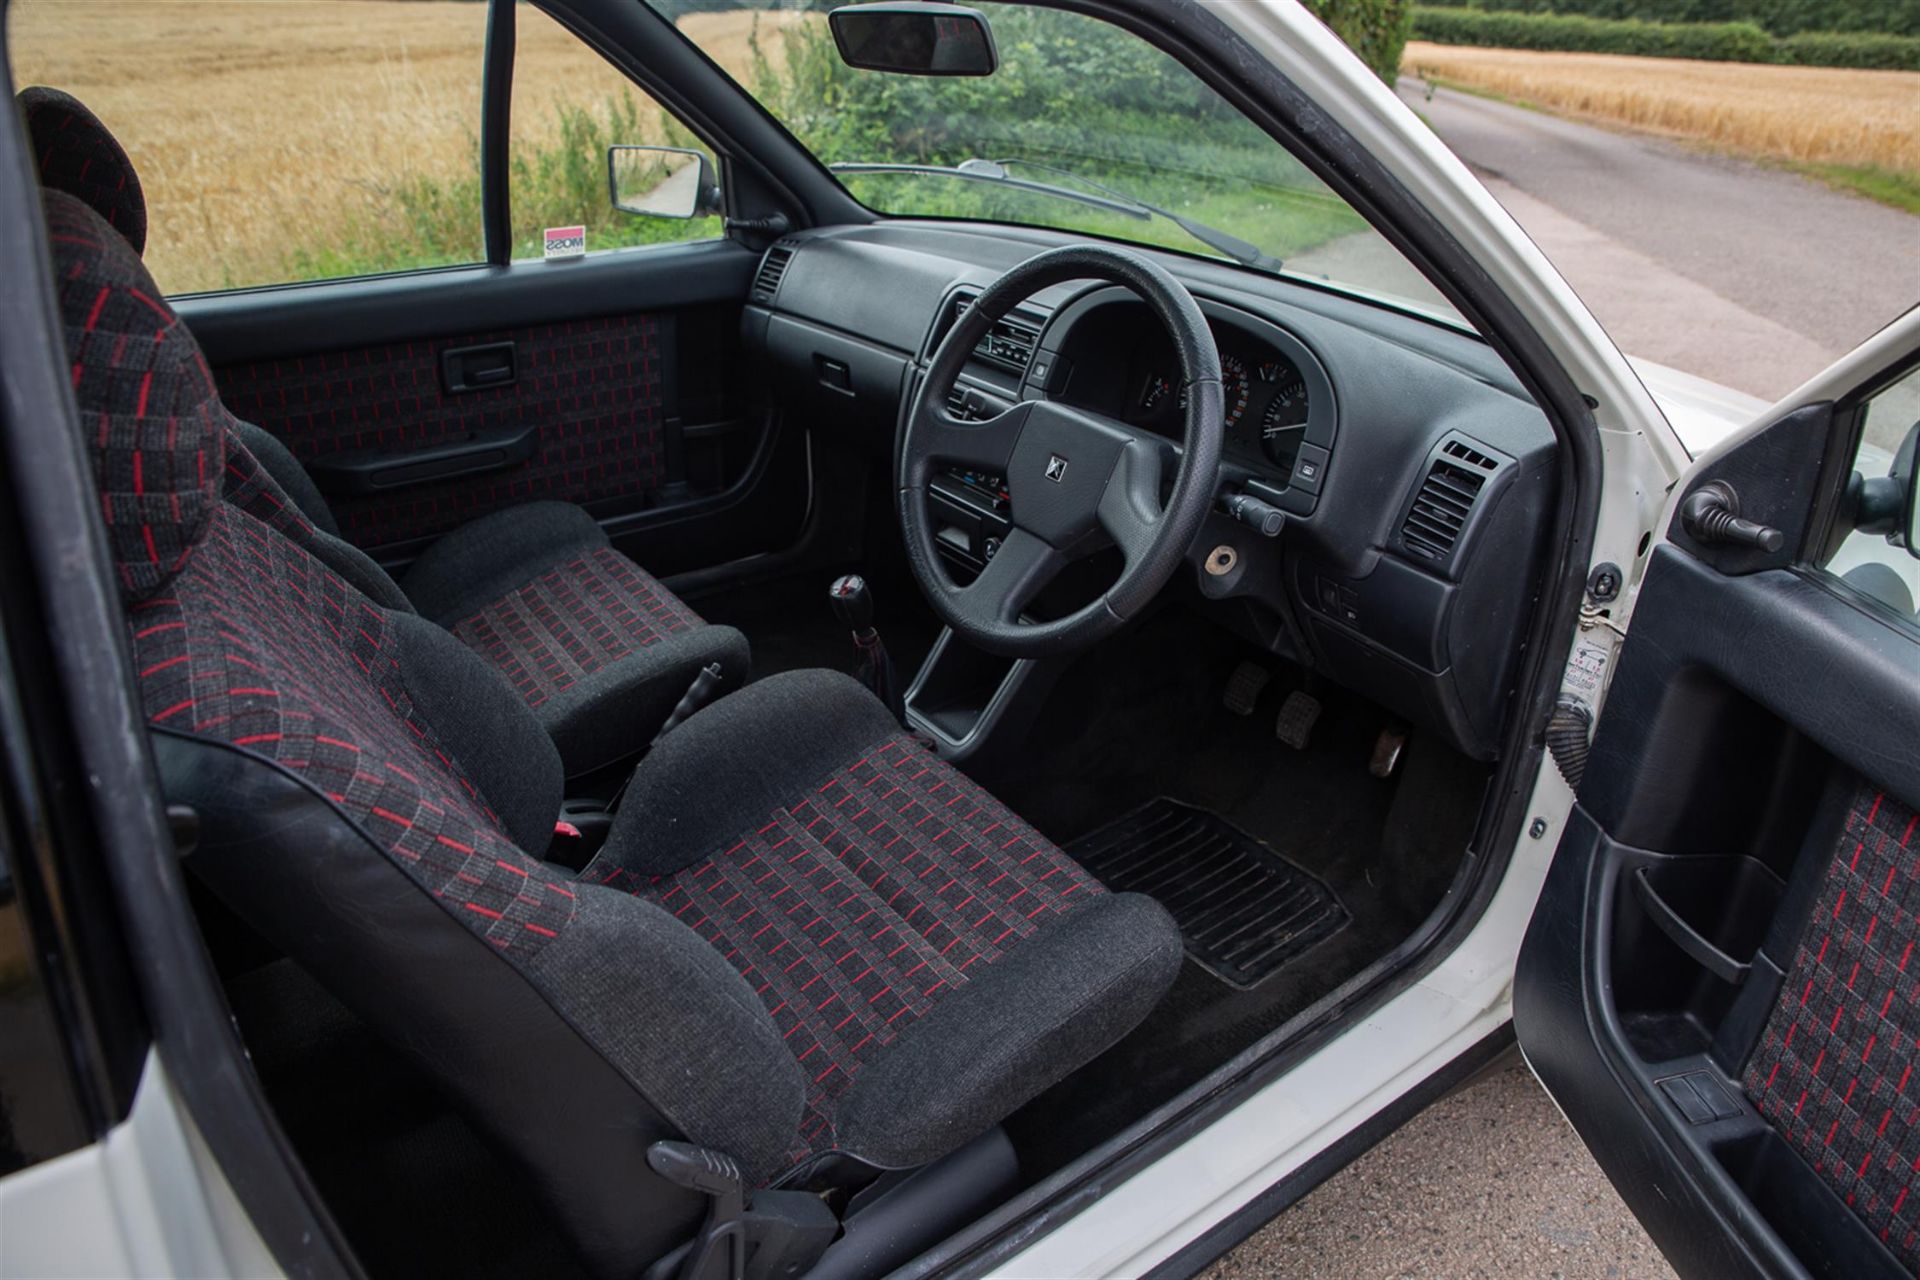 1991 Citroën AX GTi - 15,967 miles from new - Image 2 of 10